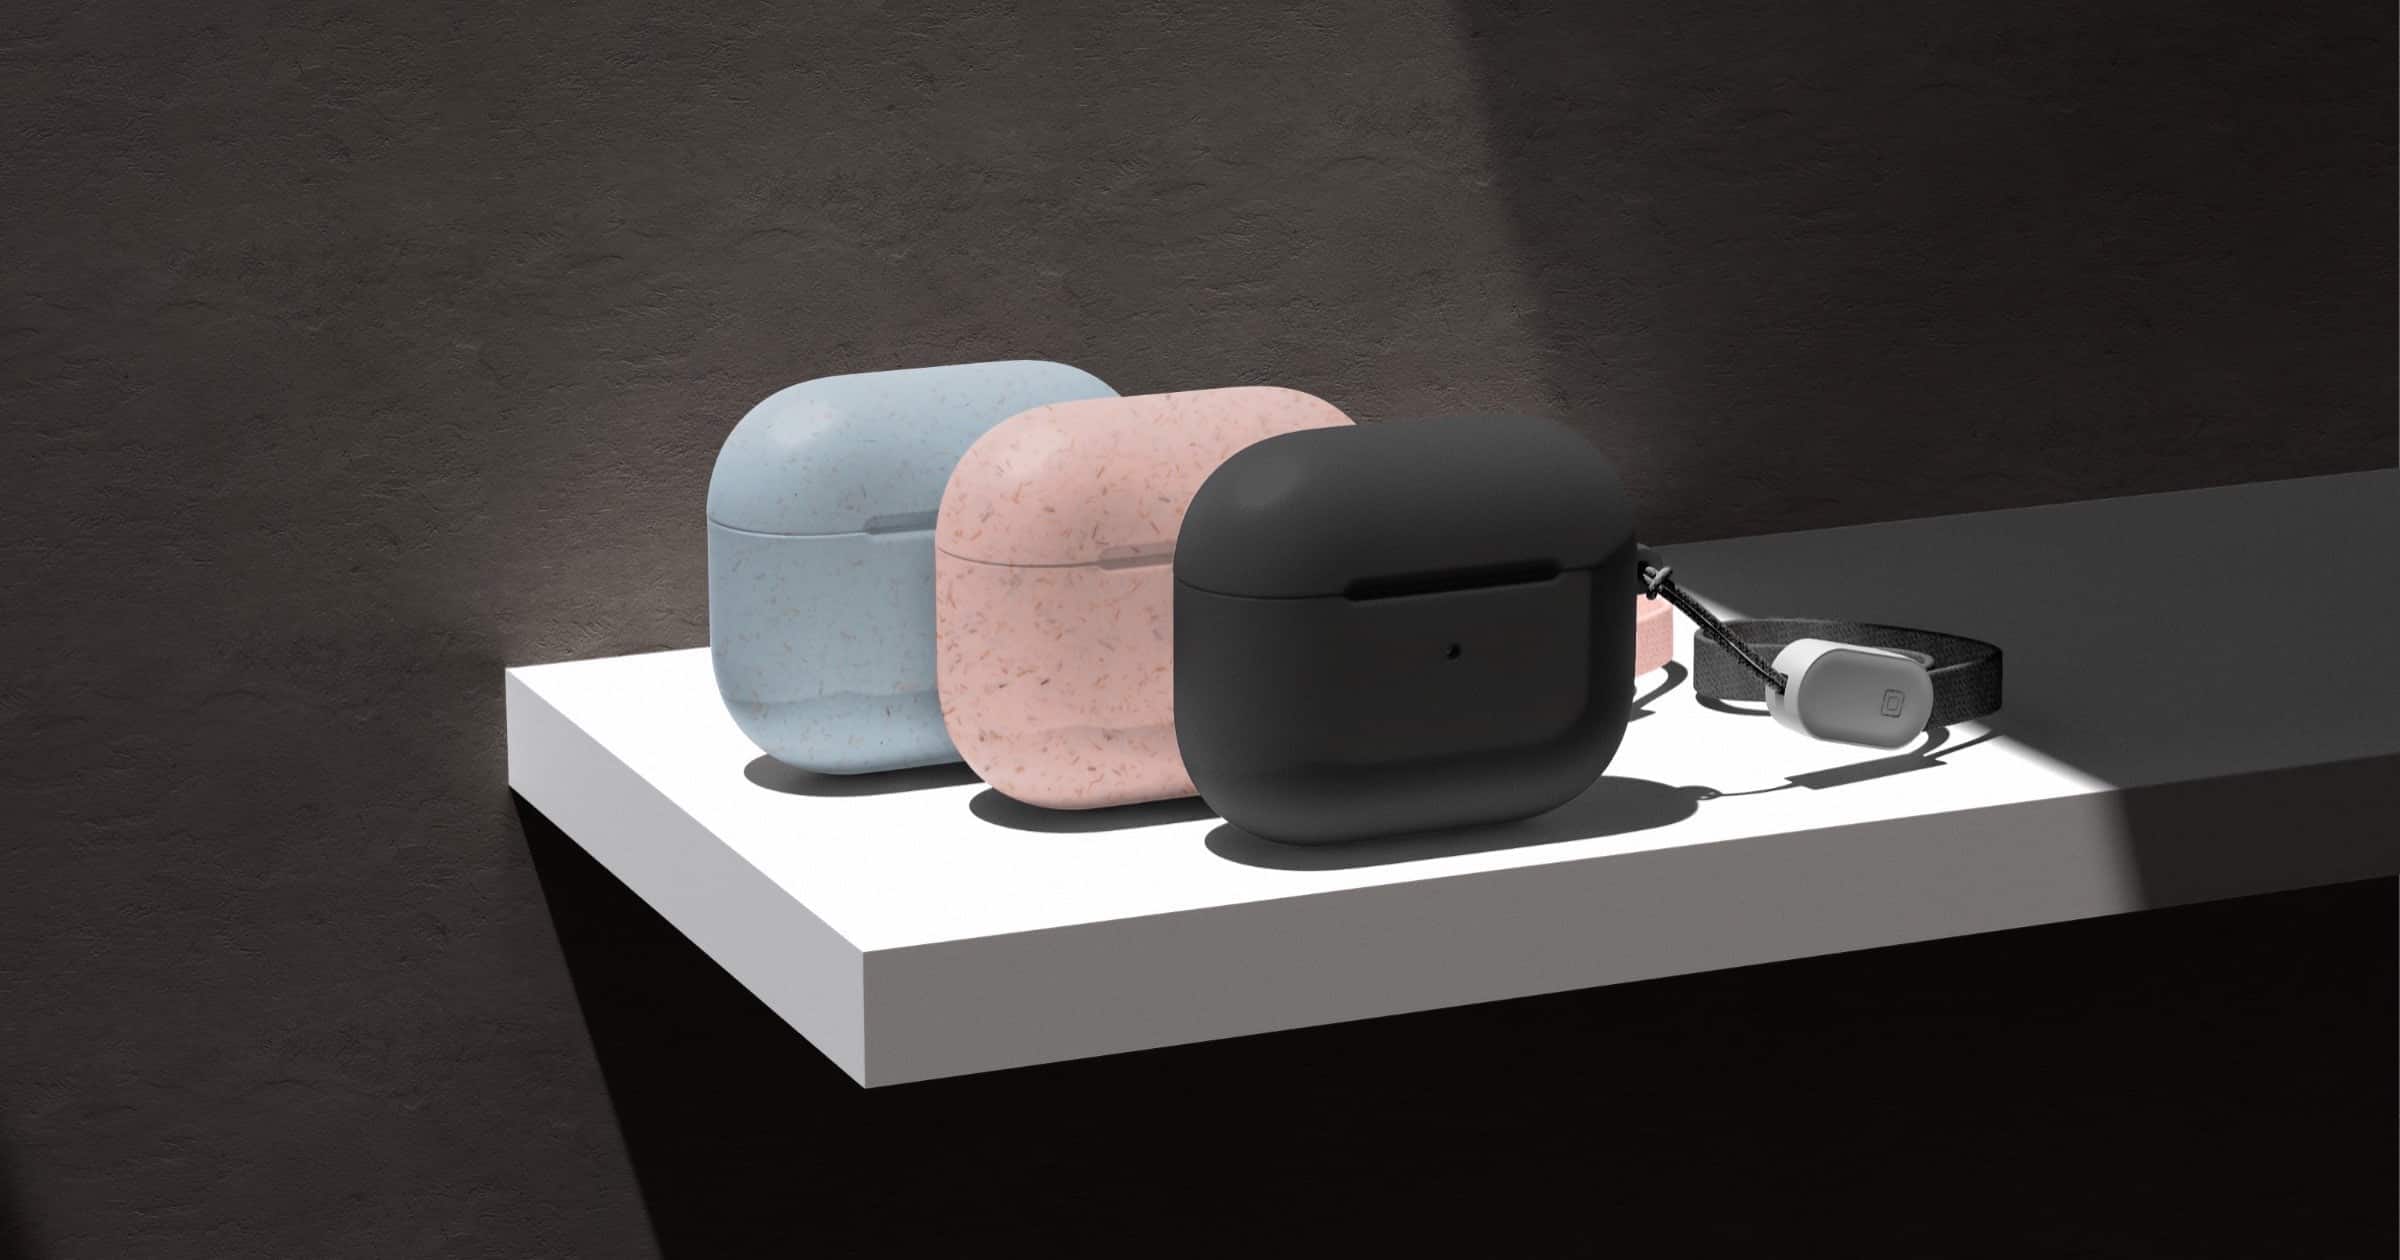 Incipio, Kate Spade New York, Incase Offer Accessories for New AirPods,  MacBook Pro - The Mac Observer